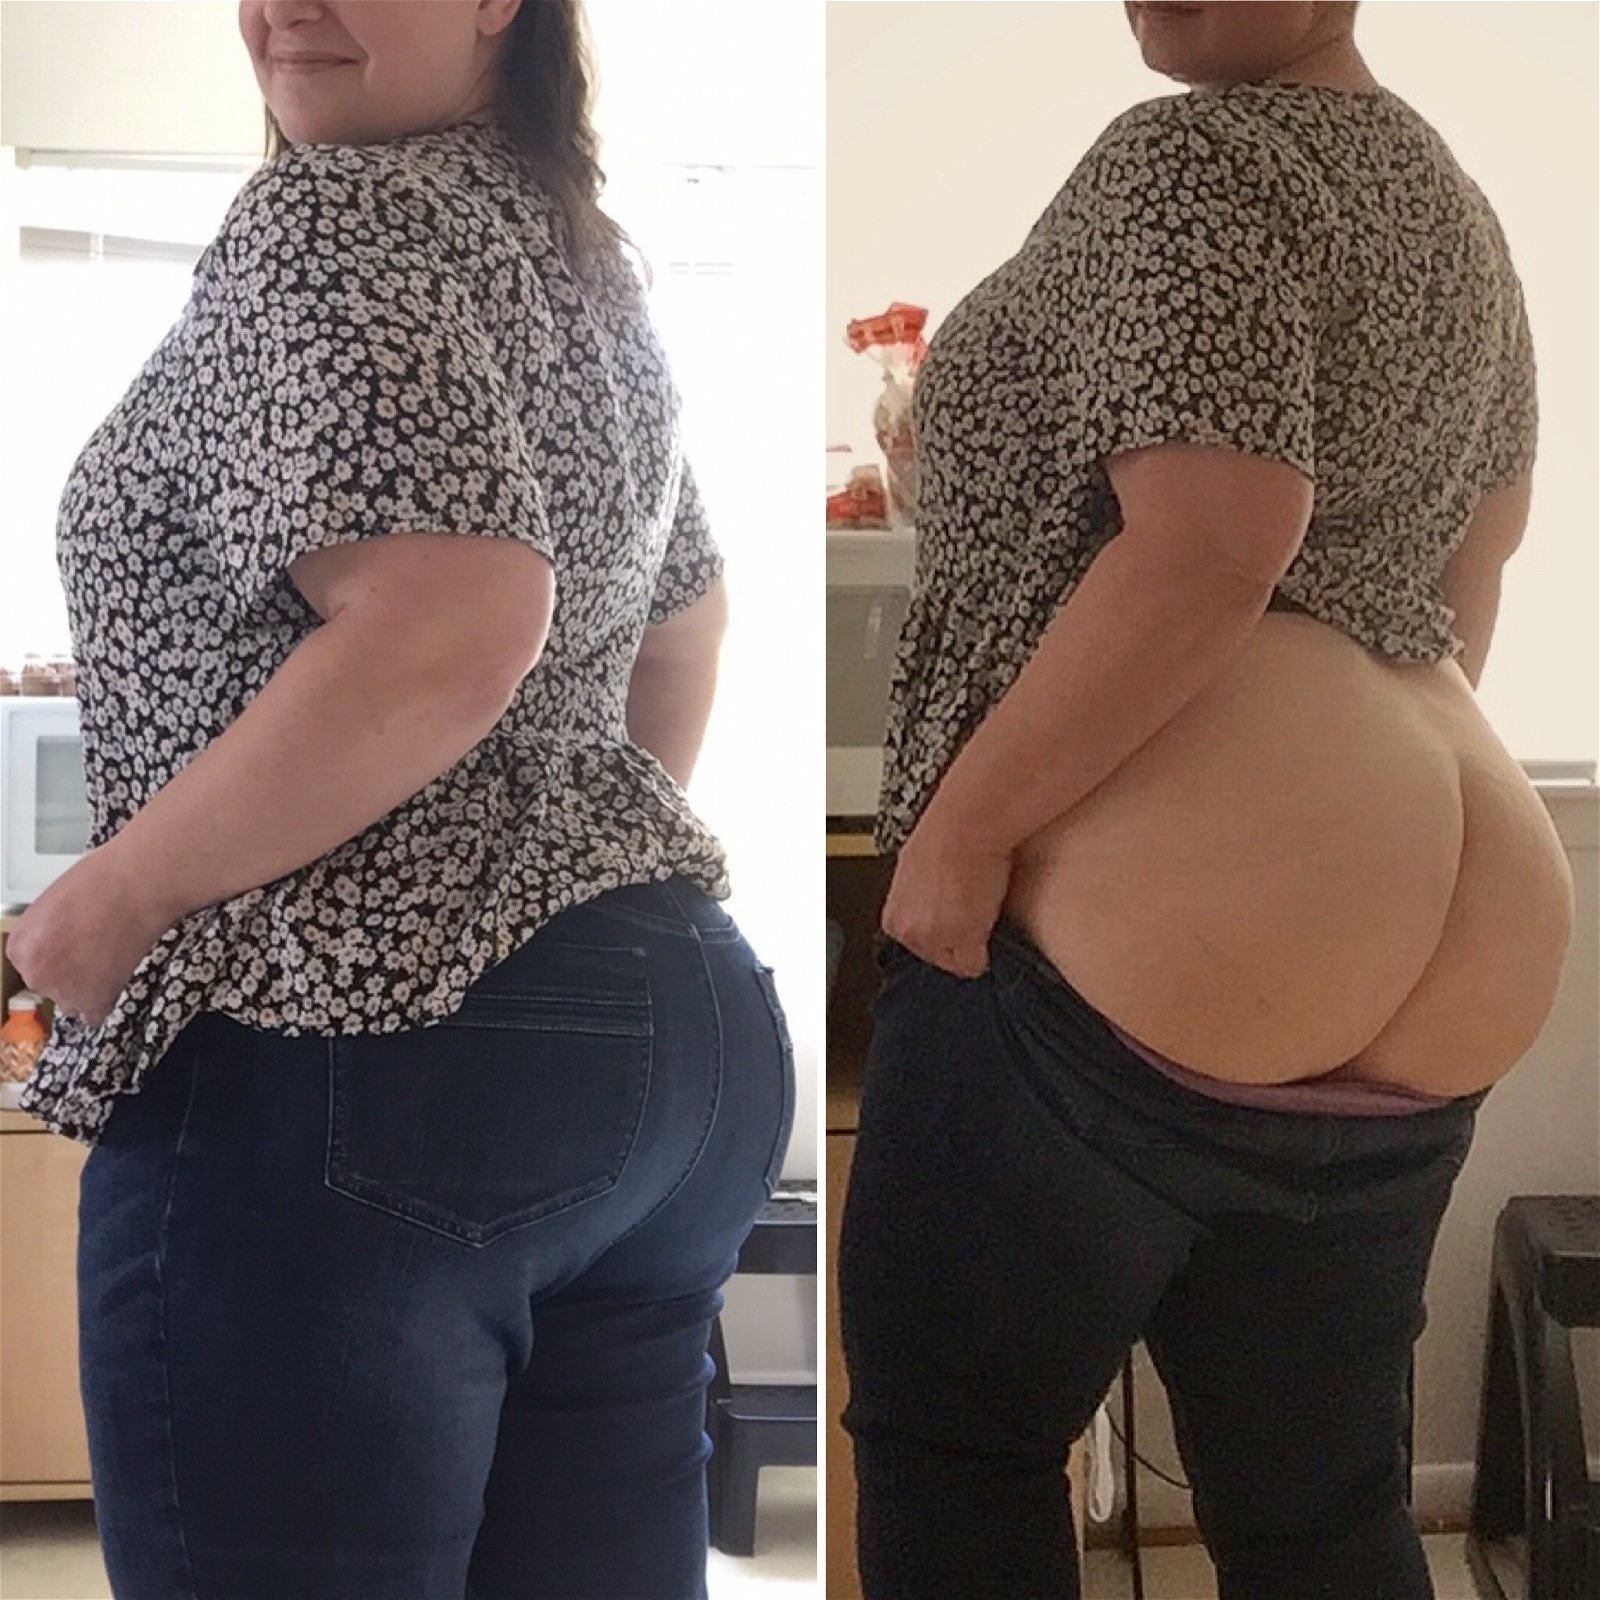 Photo by JessBBW with the username @JessBBW, who is a verified user,  July 25, 2020 at 3:18 AM. The post is about the topic chubby amateurs and the text says 'I’m just livin’ that phat ass MILF life!! That’s me when the kids are around, and me when they are not around! LOL!'